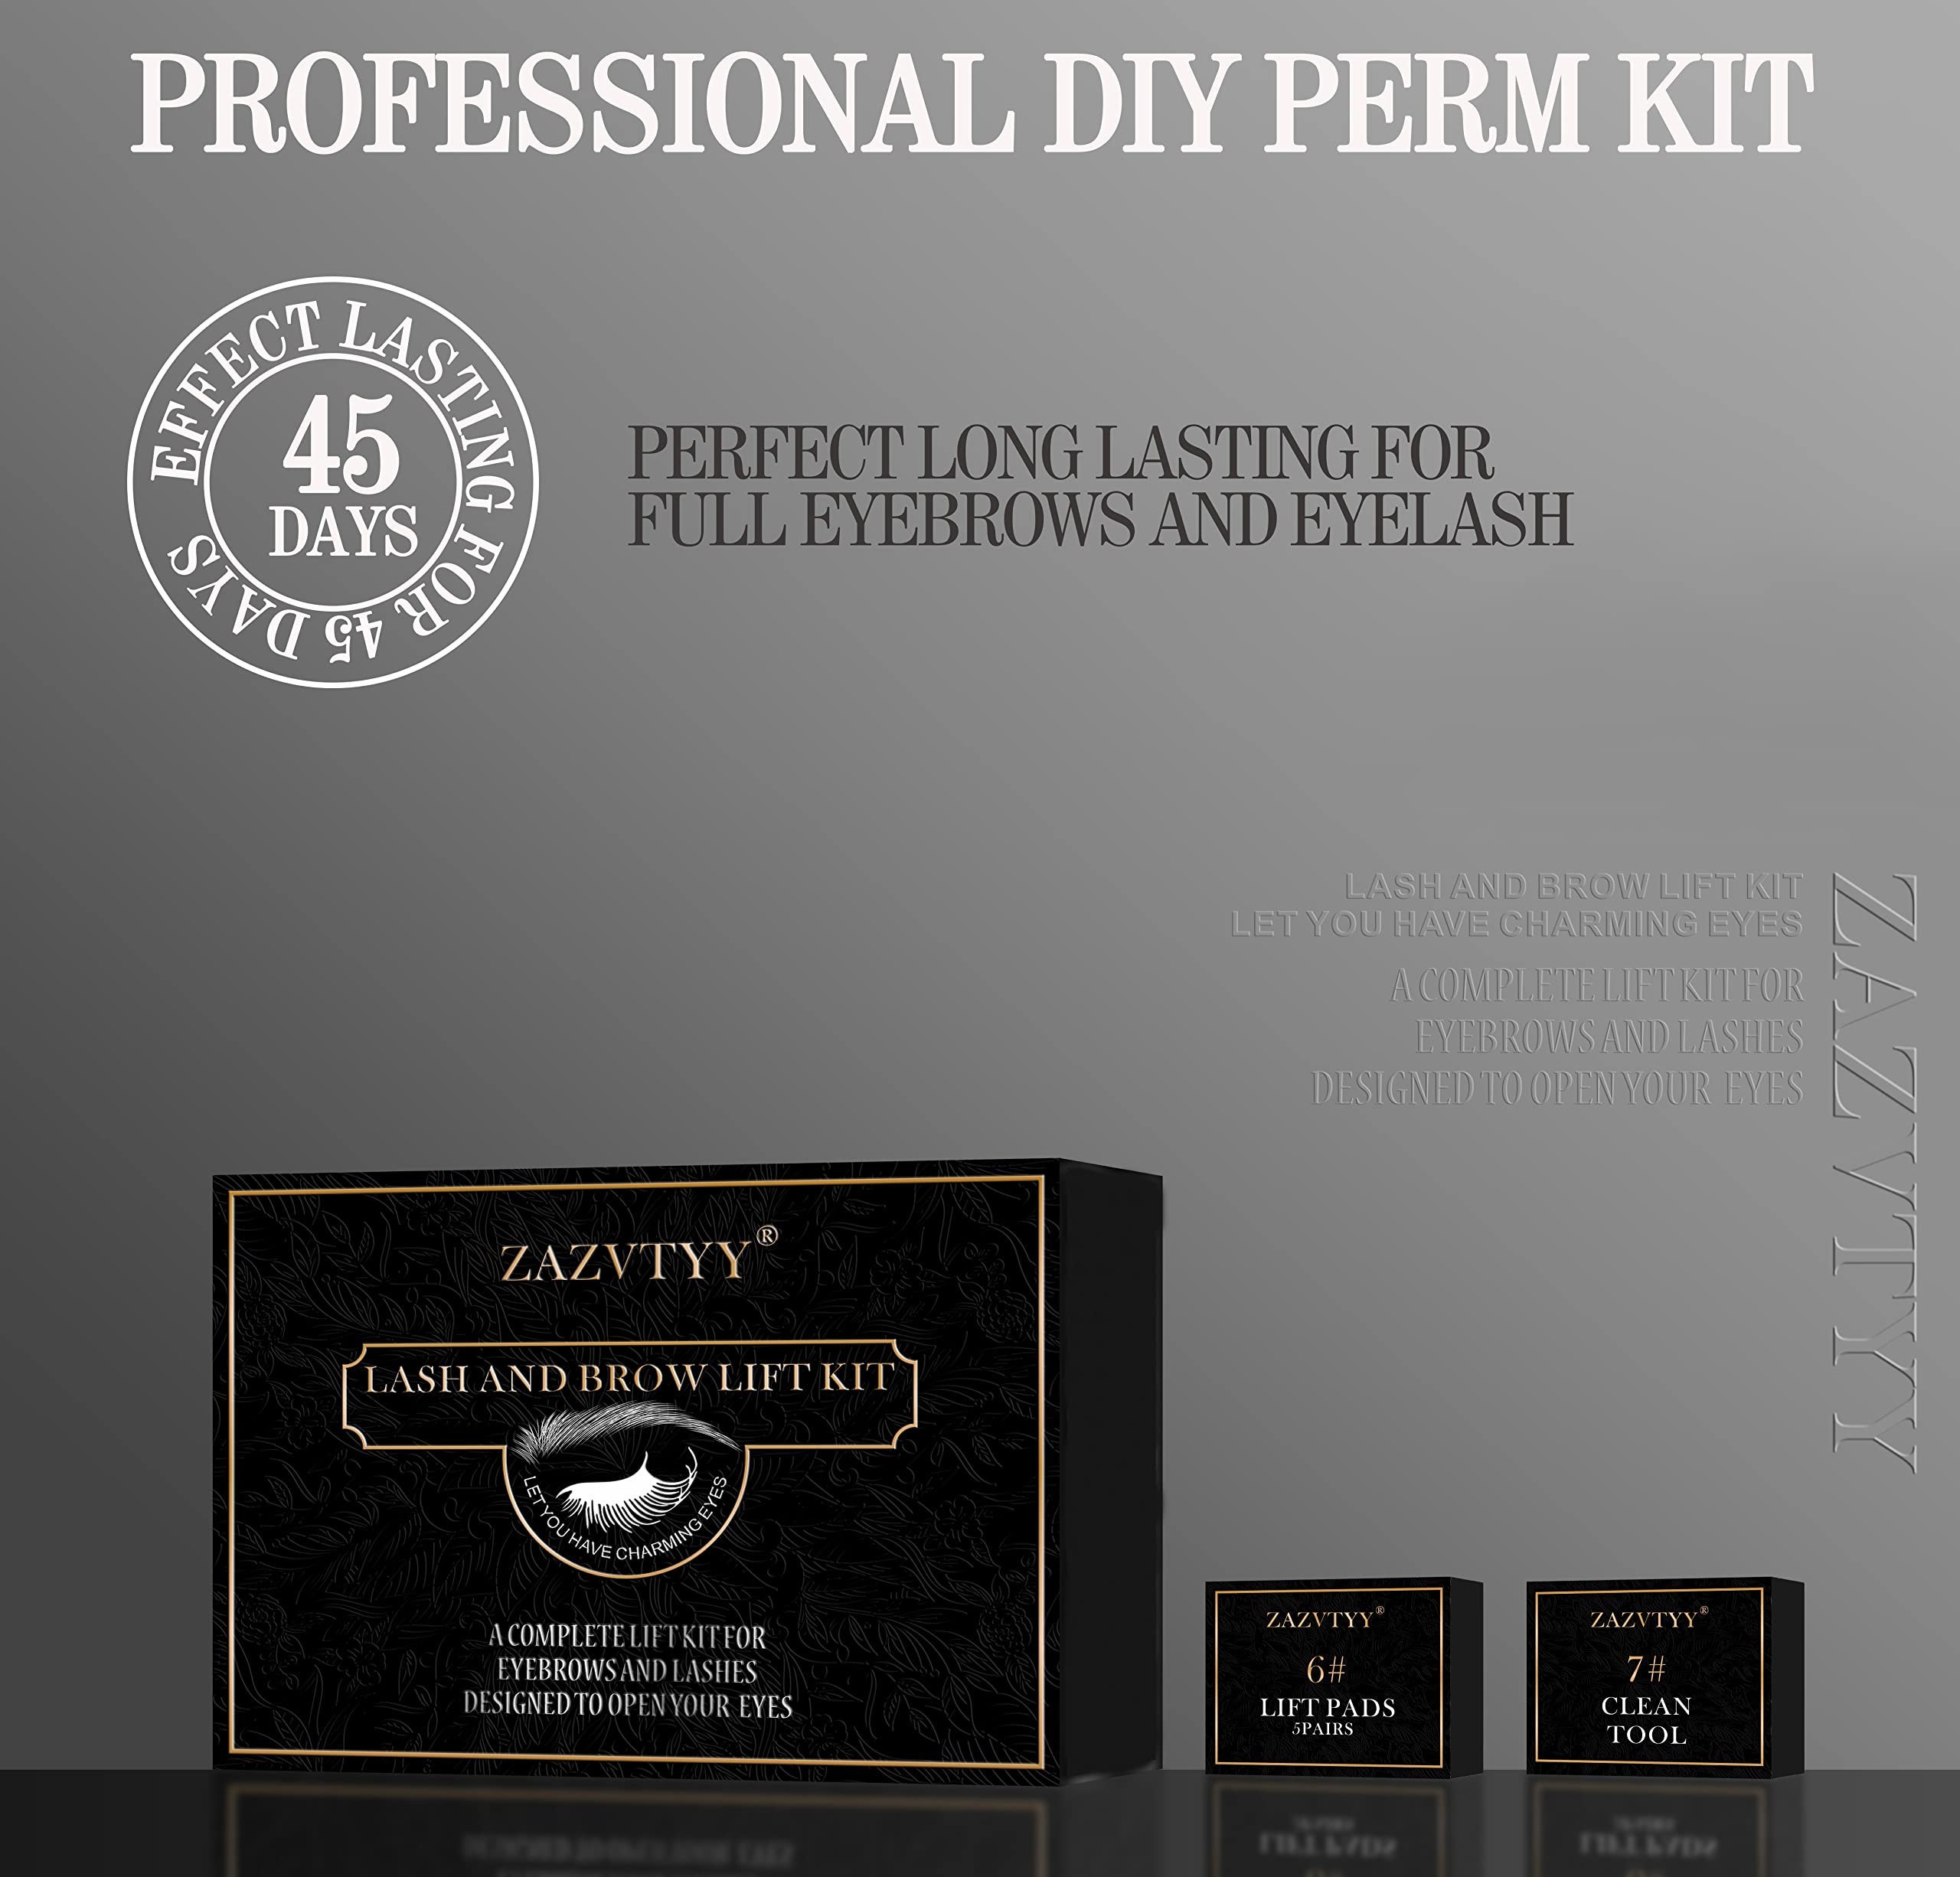 Brow Lamination Kit,Lash Lift and Eyebrow Lamination Kit,Professional Brow & Lash Perm Kit,Fuller & Thicker Brows Long-lasting for 6-8 Weeks,Instant Lifting and Curling,Suitable for Salon & Home Use